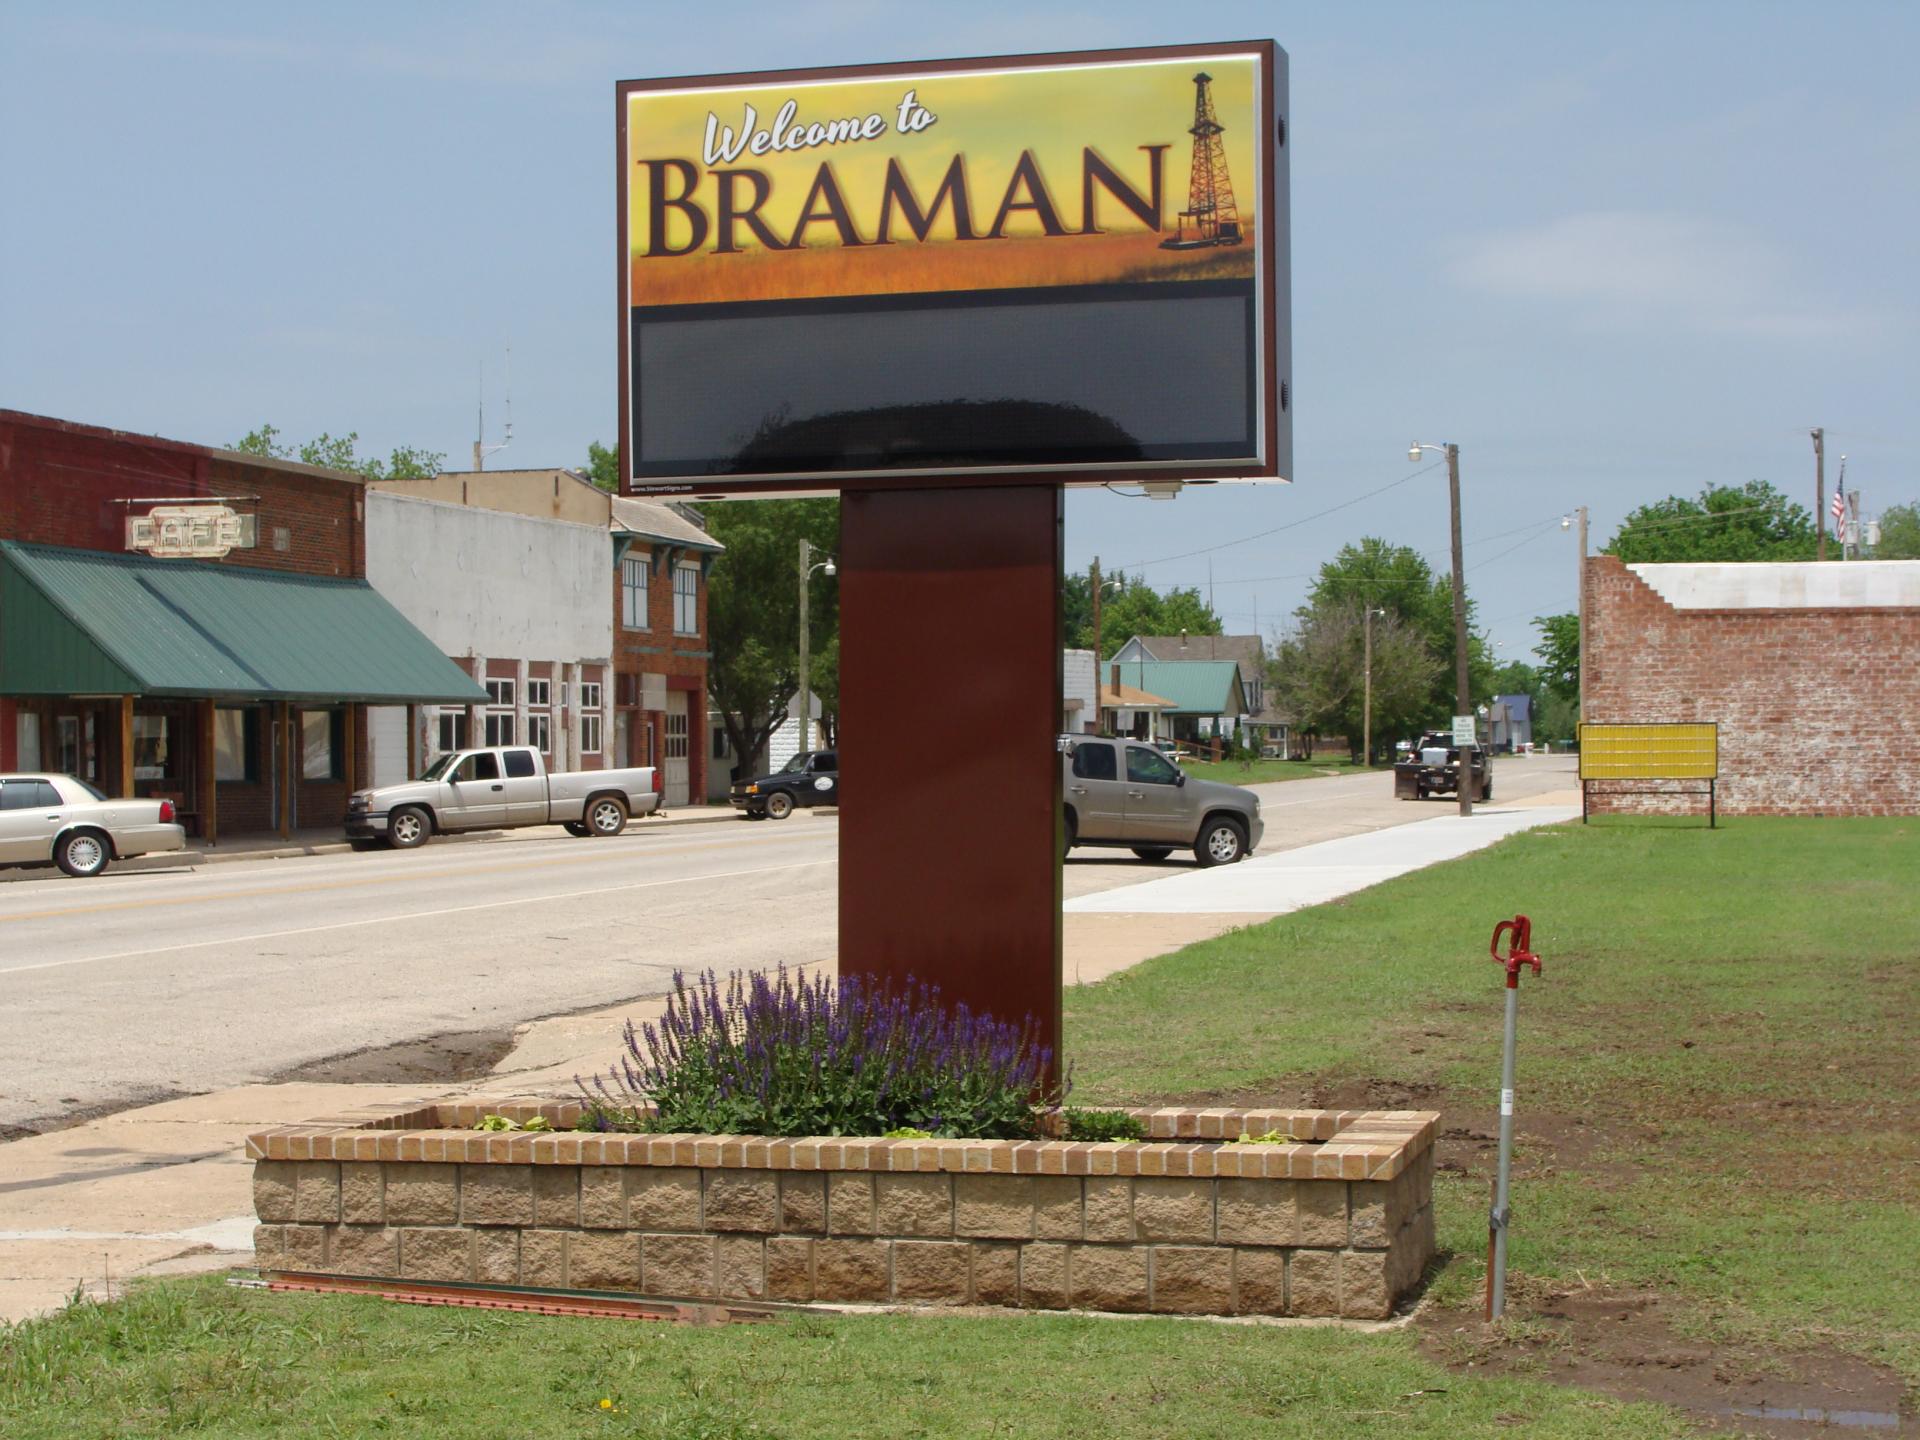 AUDIT UNCOVERS SUSPECTED EMBEZZLEMENT IN TOWN OF BRAMAN